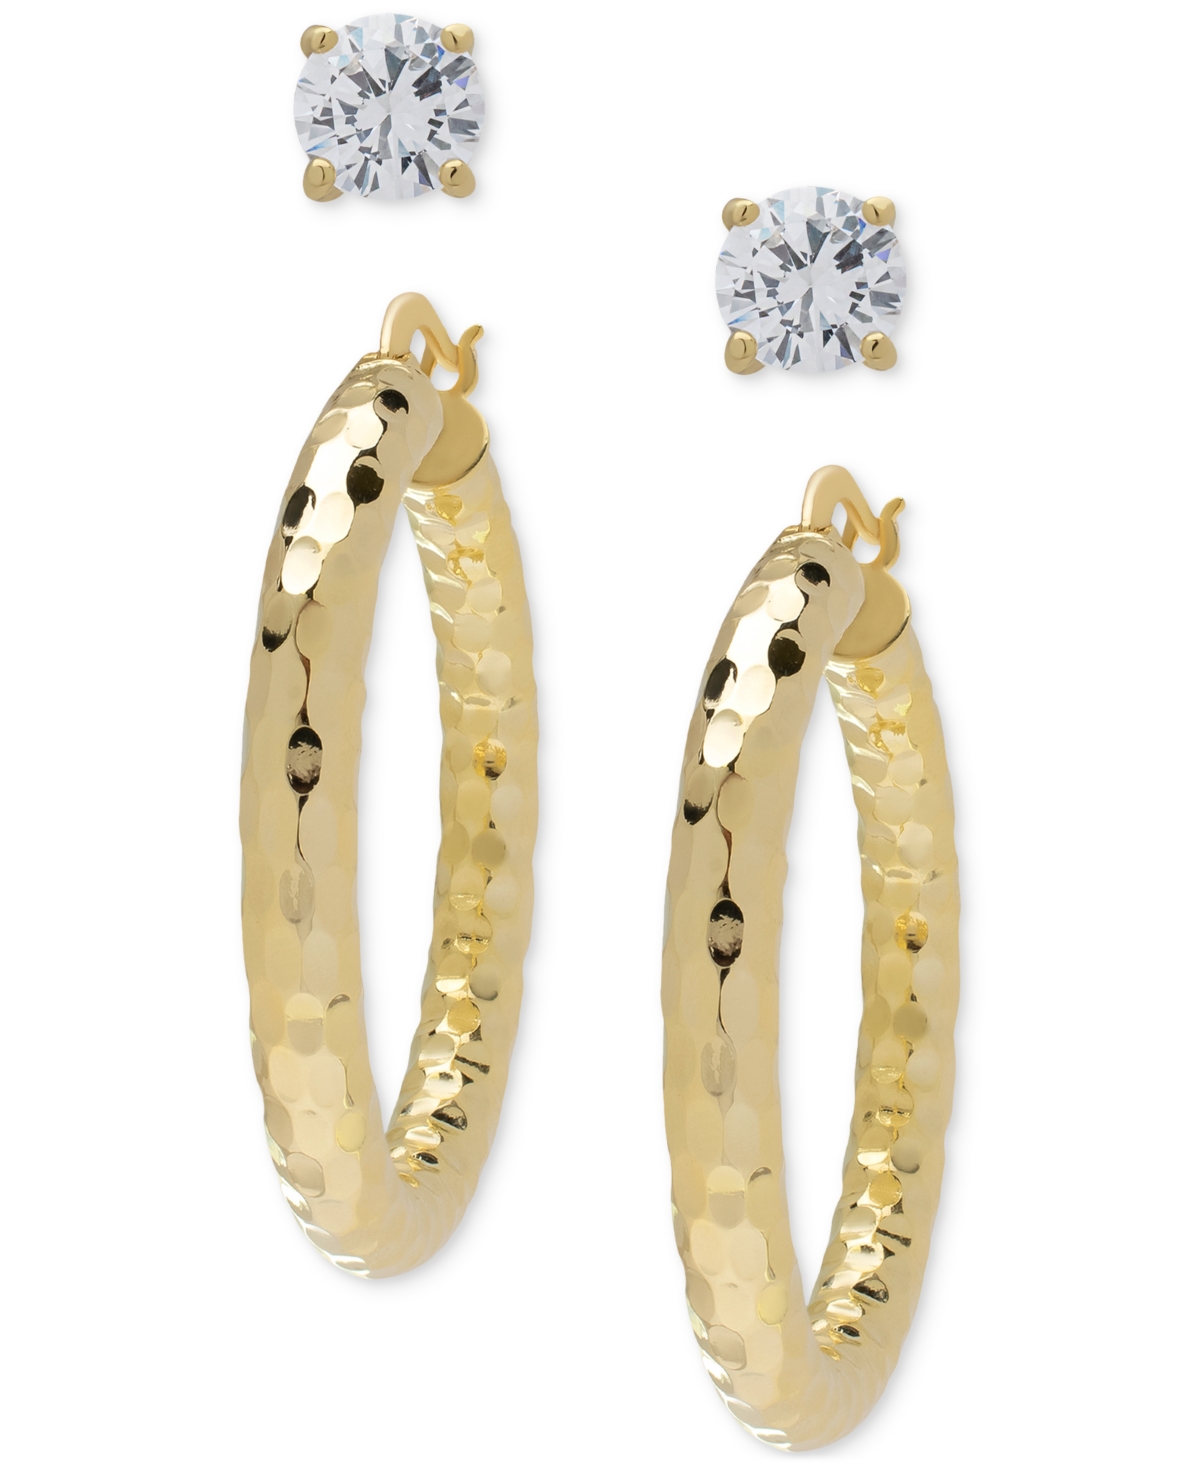 2-Pc. Set Lab-Grown White Sapphire Stud & Textured Medium Hoop Earrings (2-1/10 ct. t.w.) in 14k Gold-Plated Sterling Silver - Gold